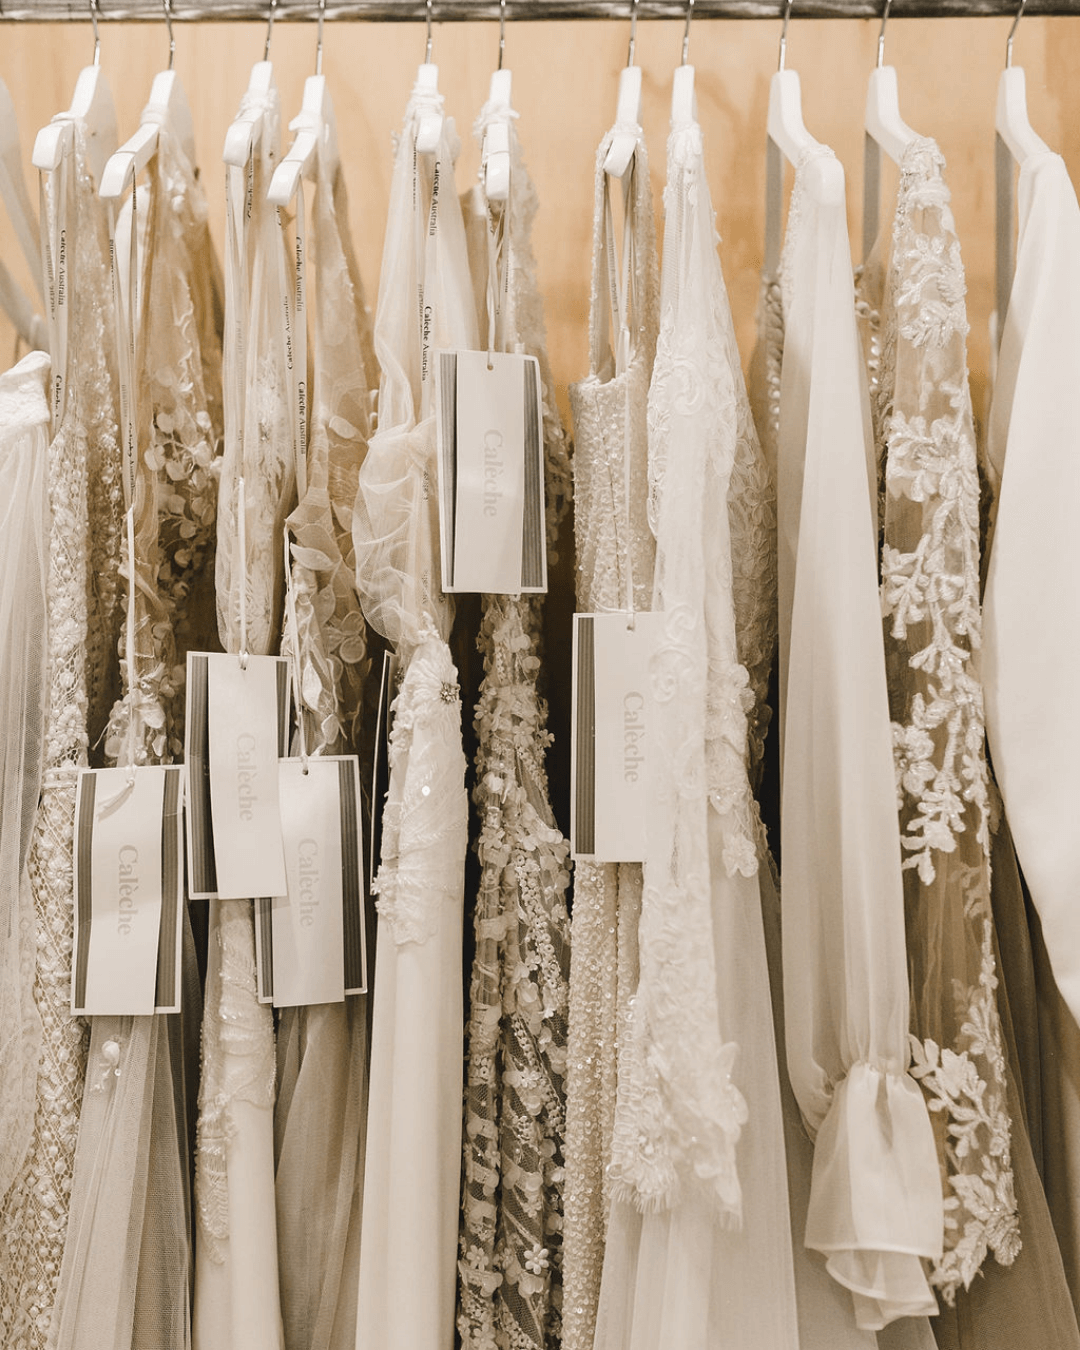 Off the Rack or Made to Measure Wedding Dress?